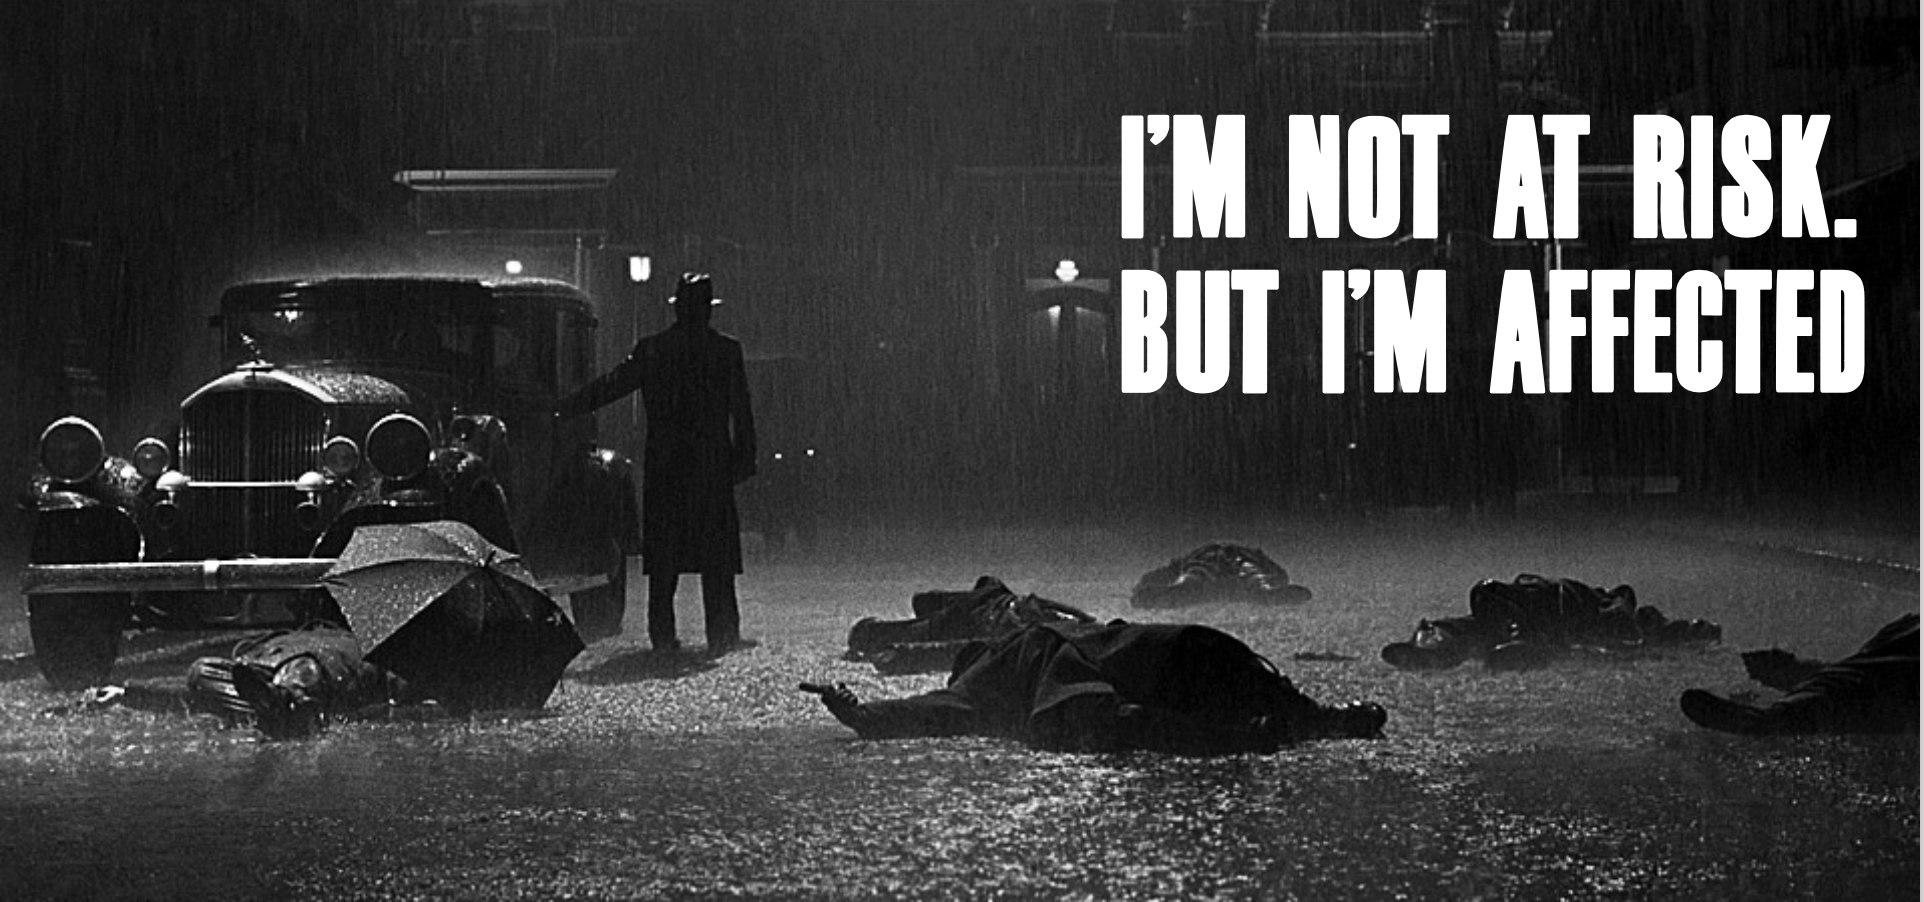 Film Noir scene, with text "I'm not at risk. But I'm affected"